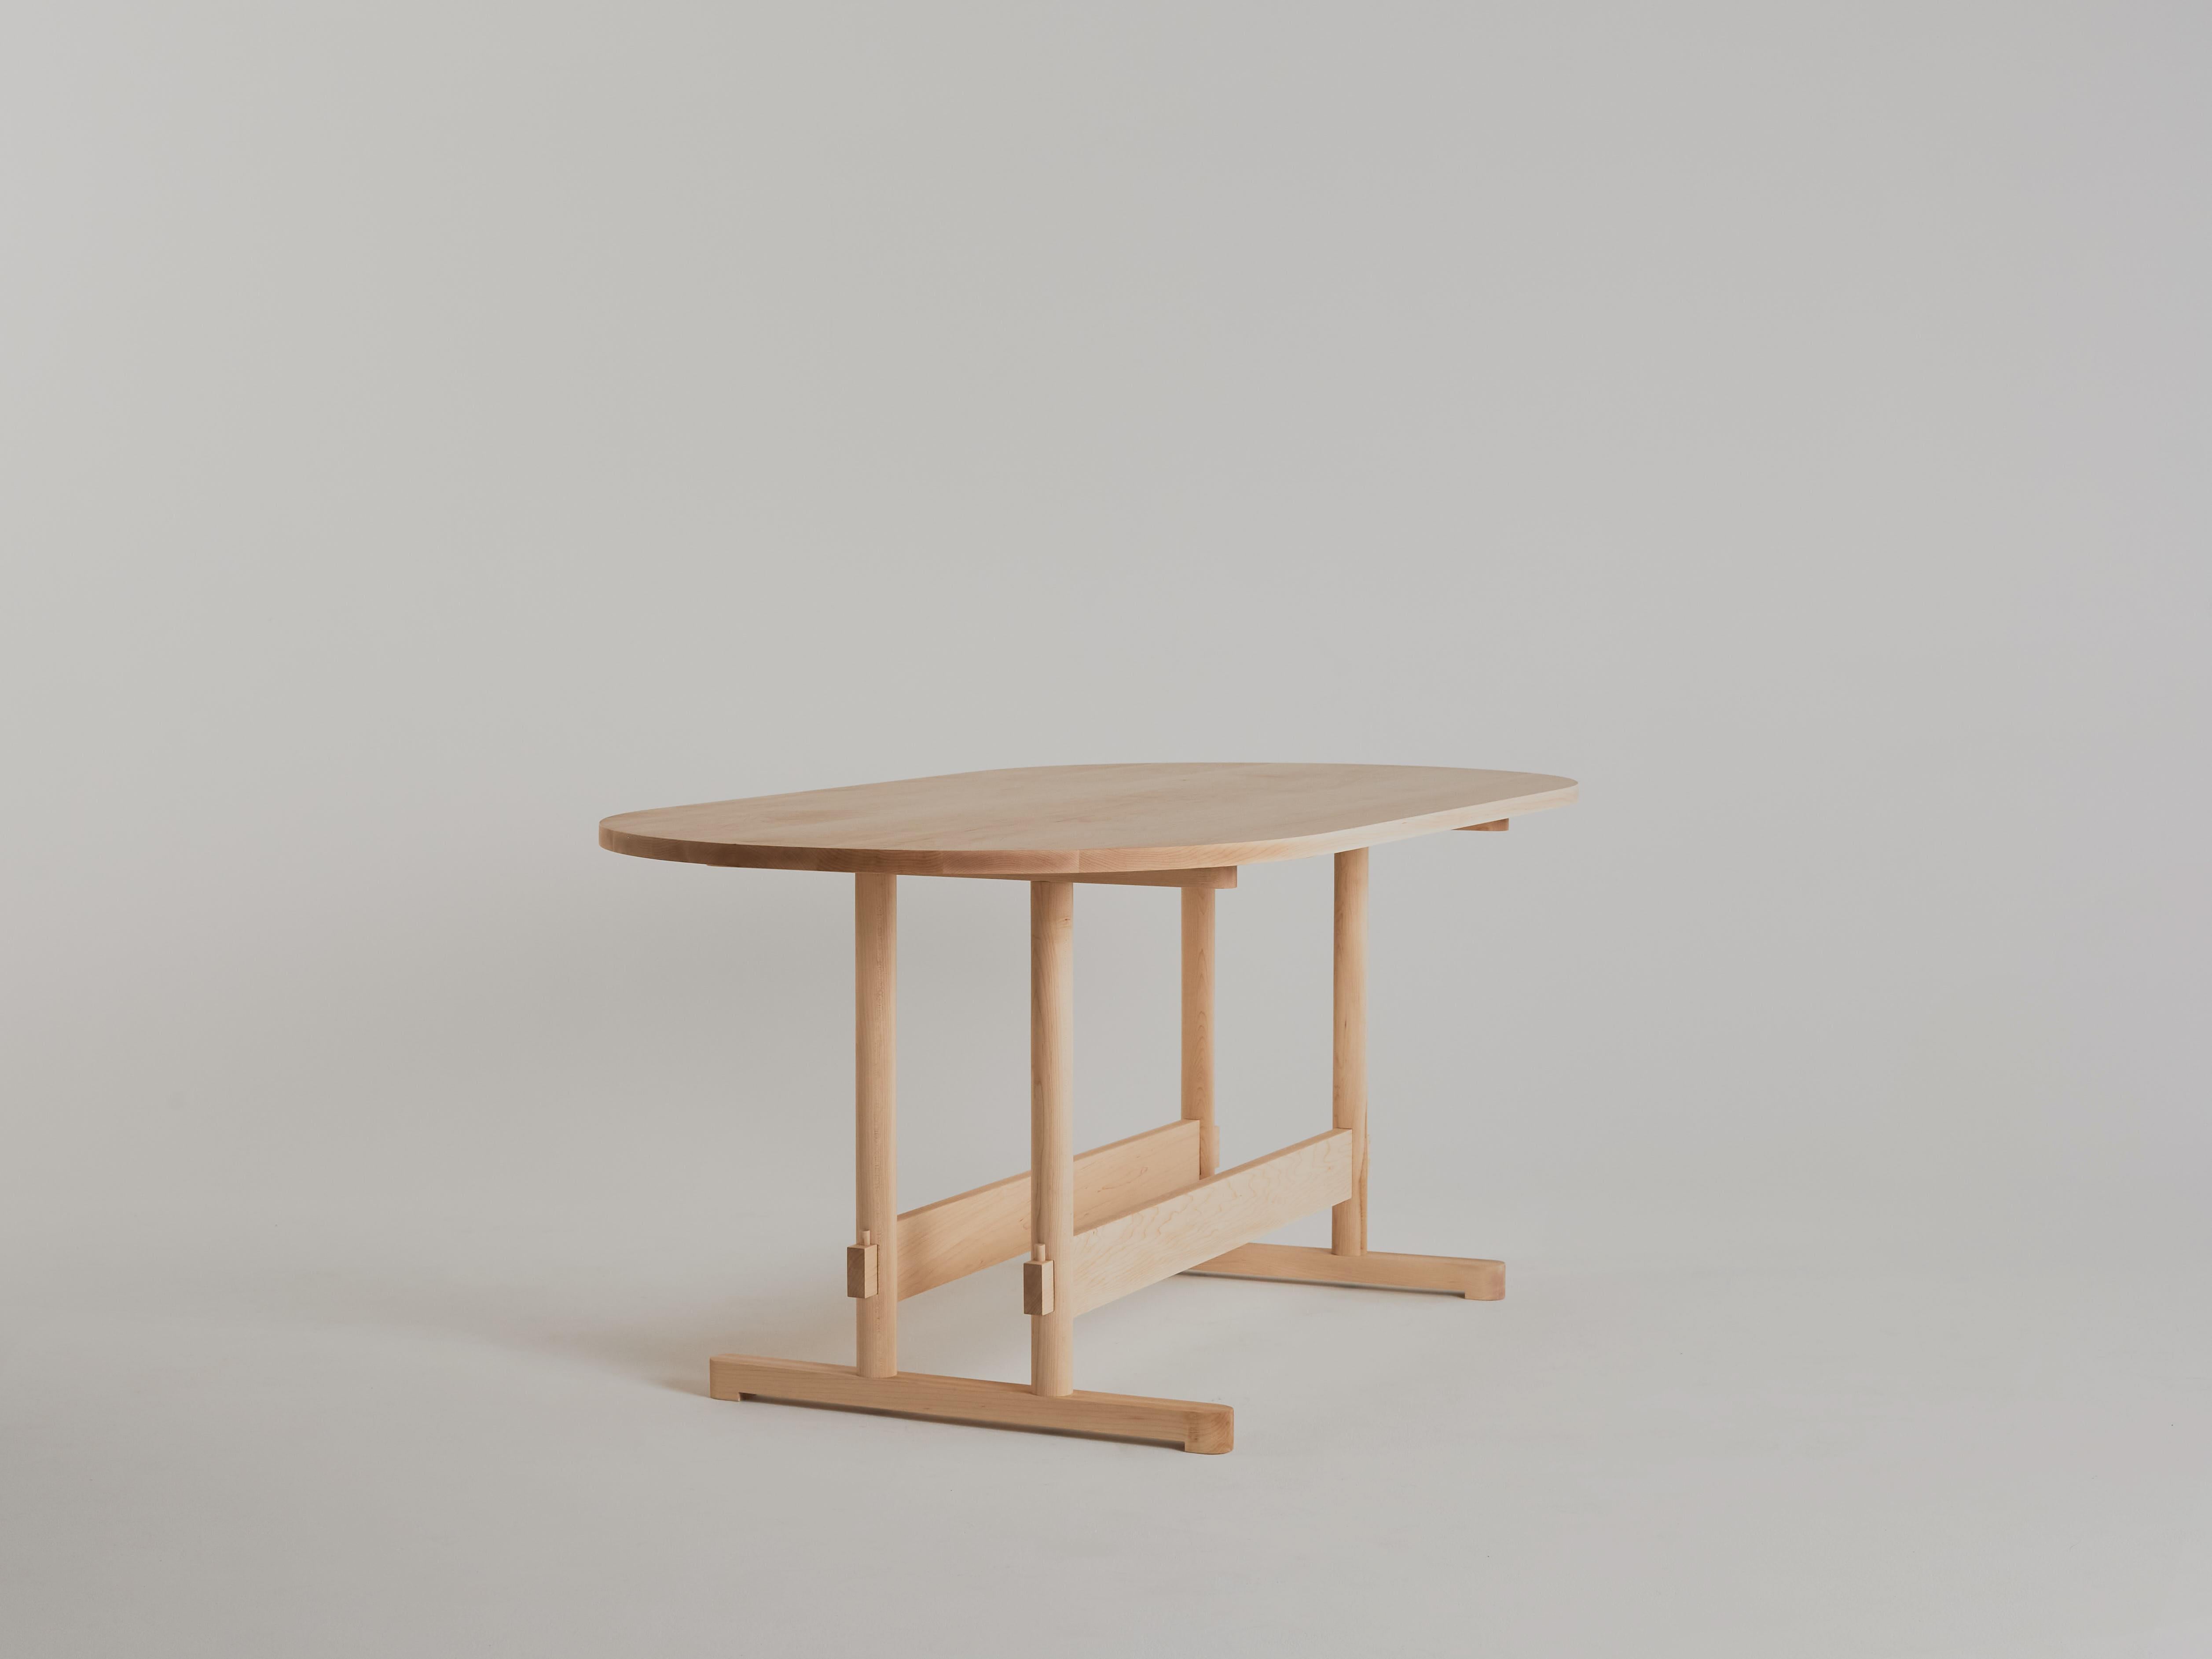 Dining table no. 2 by Campagna, shown in Maple. 

This updated take on the classic trestle dining table is visually light and minimal, while carrying sophisticated details and clever joinery. The leg structure and stretchers are connected using